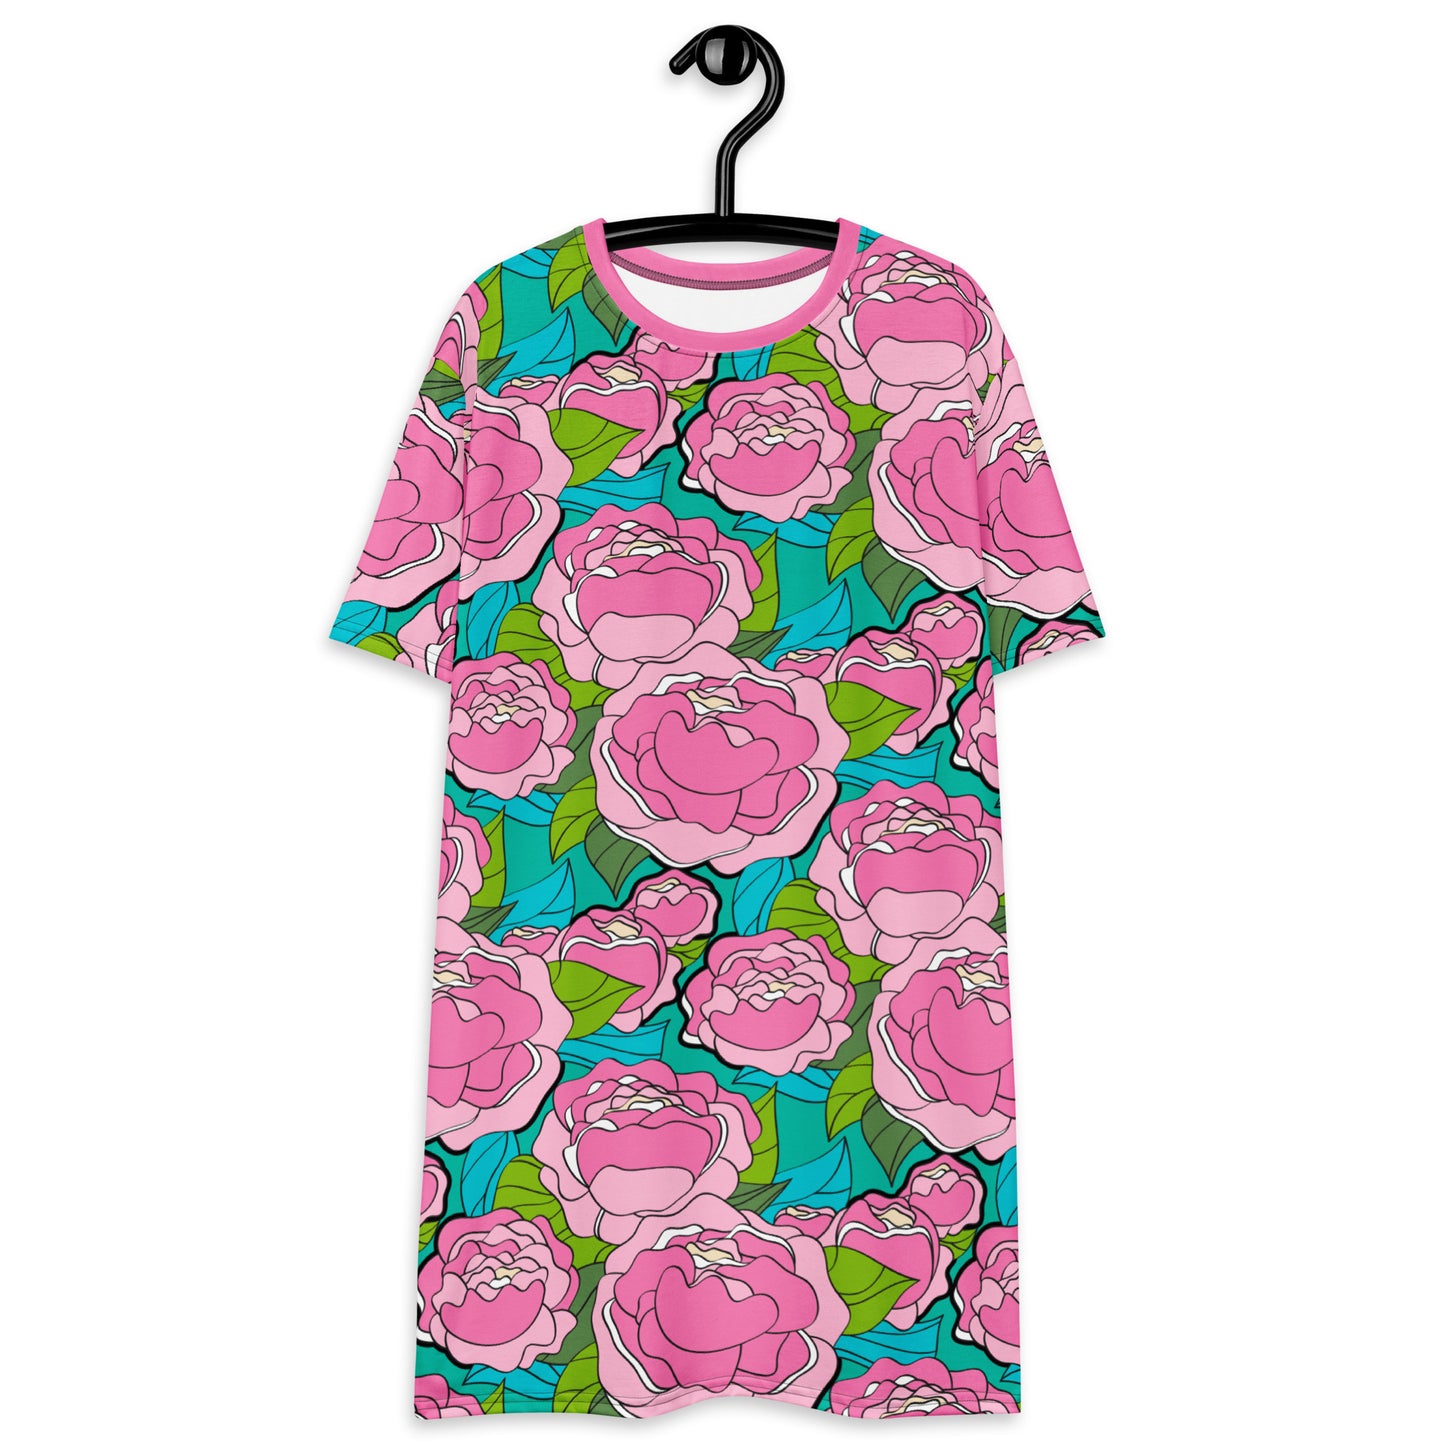 BE MY ONLY pink turquoise - T-shirt dress